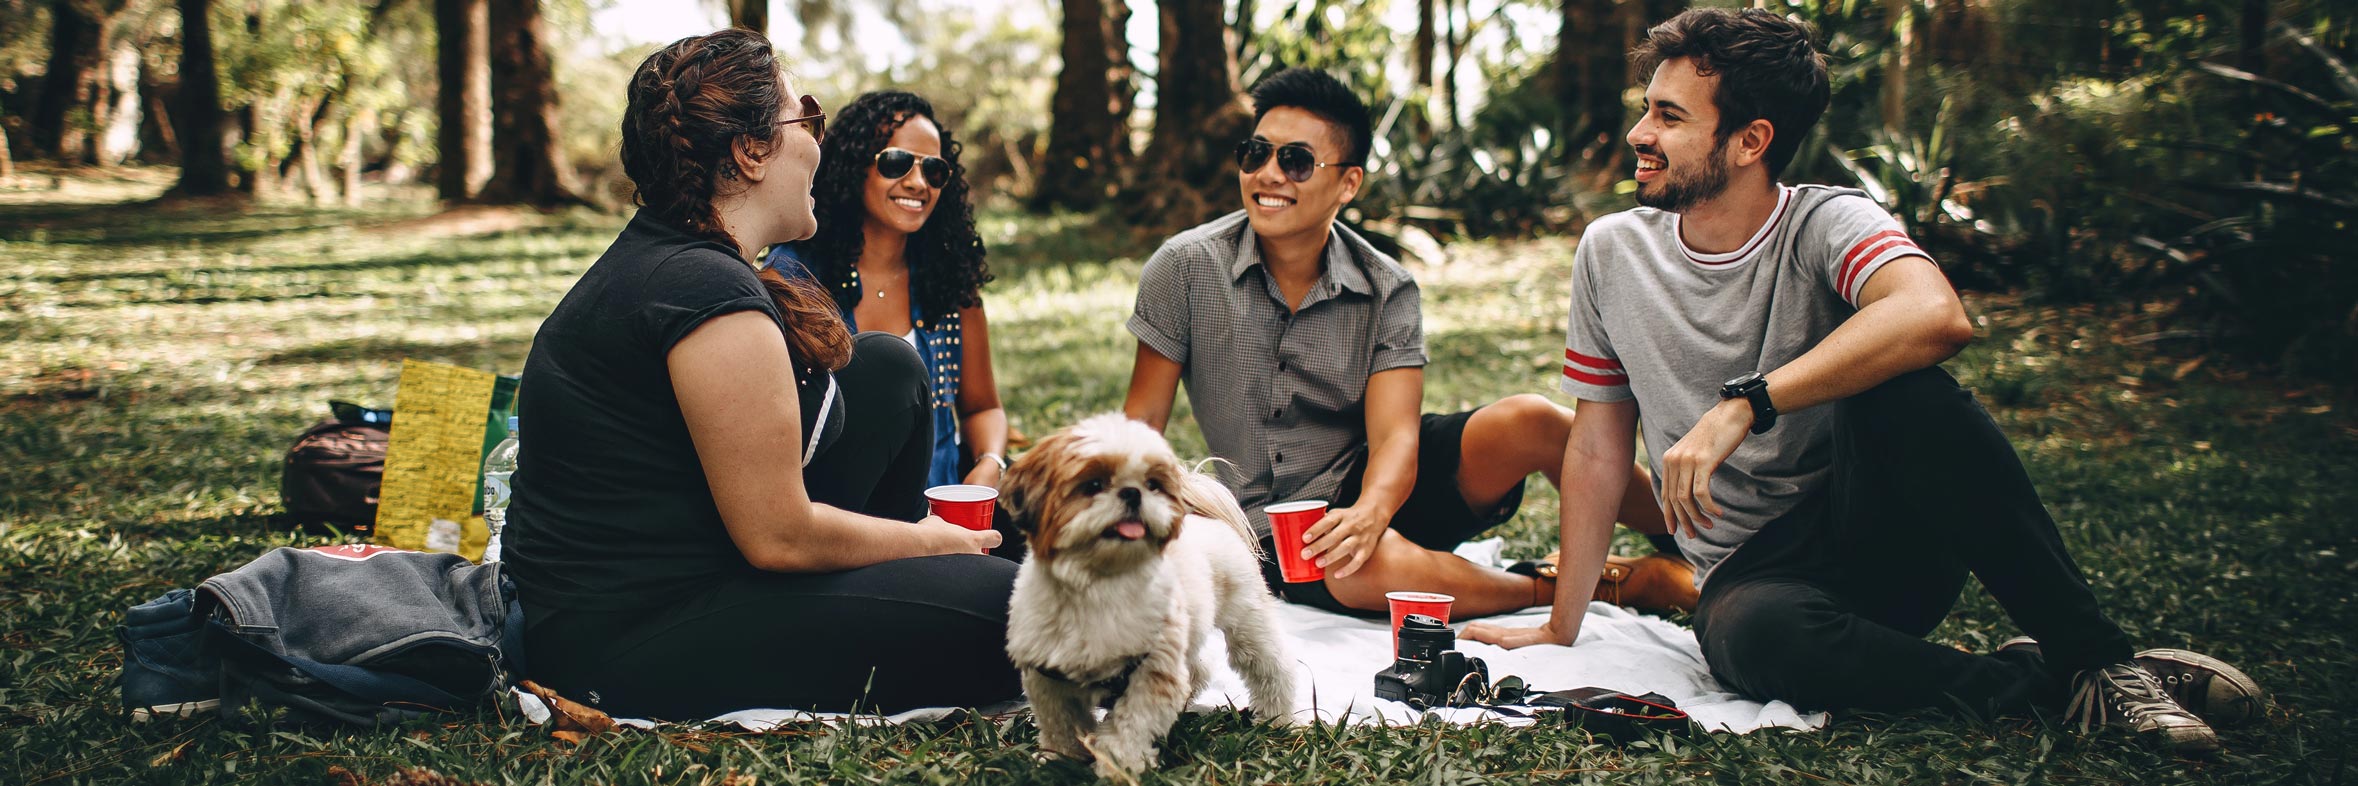 Friends picnicking in the park with their small dog.